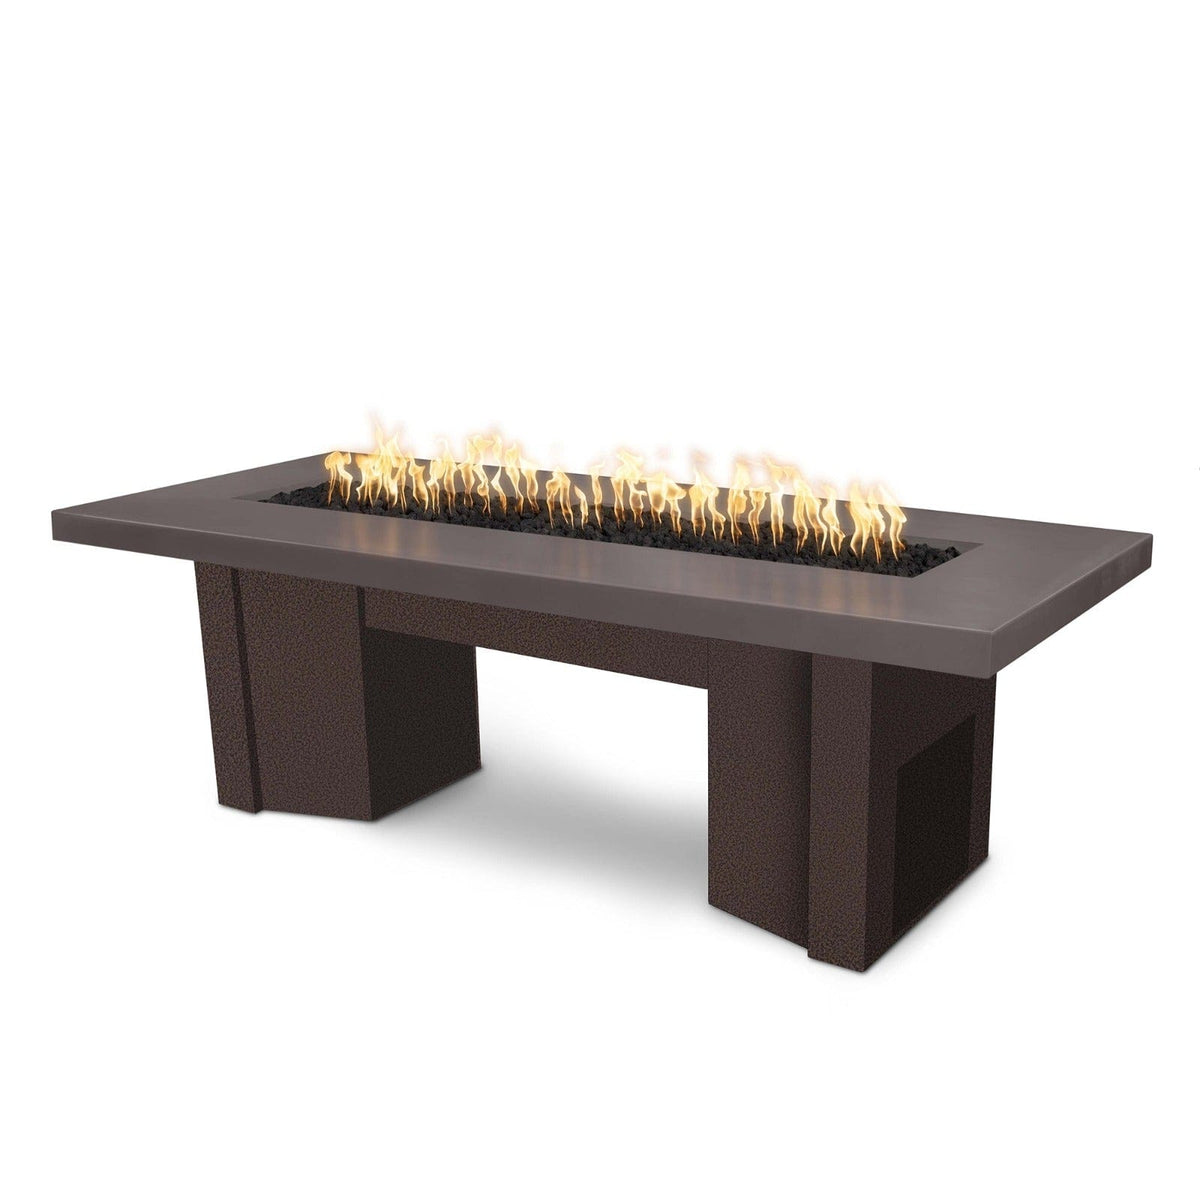 The Outdoor Plus Fire Features Chestnut (-CST) / Copper Vein Powder Coated Steel (-CPV) The Outdoor Plus 78&quot; Alameda Fire Table Smooth Concrete in Liquid Propane - Match Lit with Flame Sense System / OPT-ALMGFRC78FSML-LP